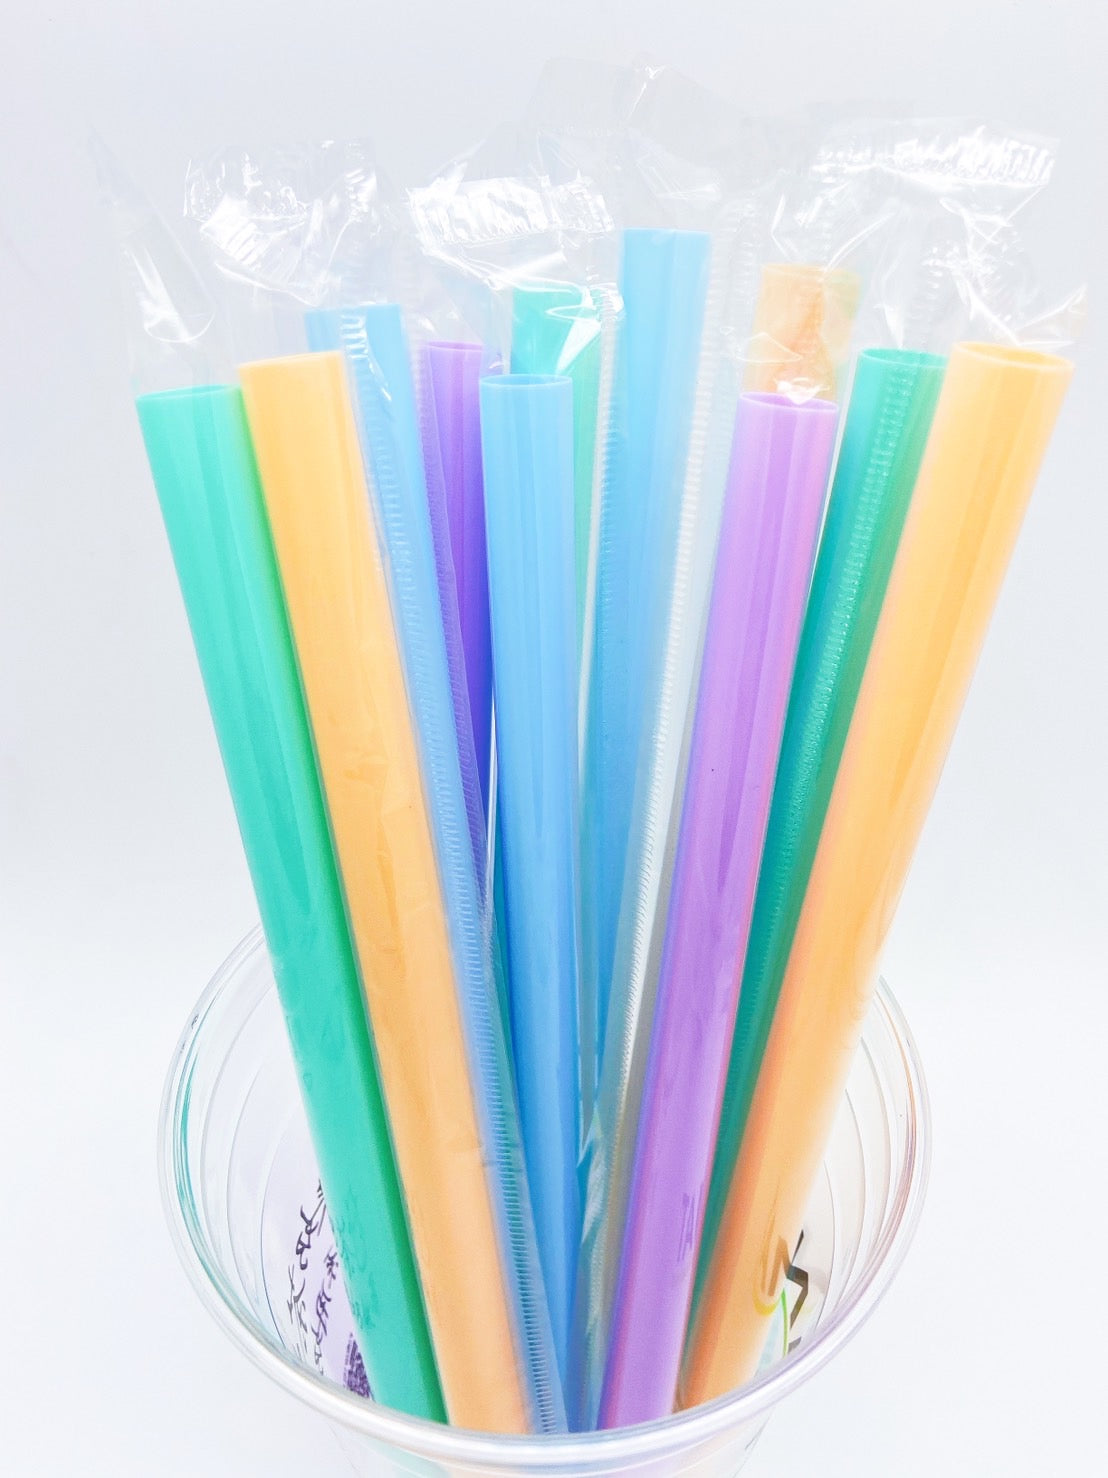 Boba Bamboo Fiber Straws, Individually Wrapped for Drinks, Bubble